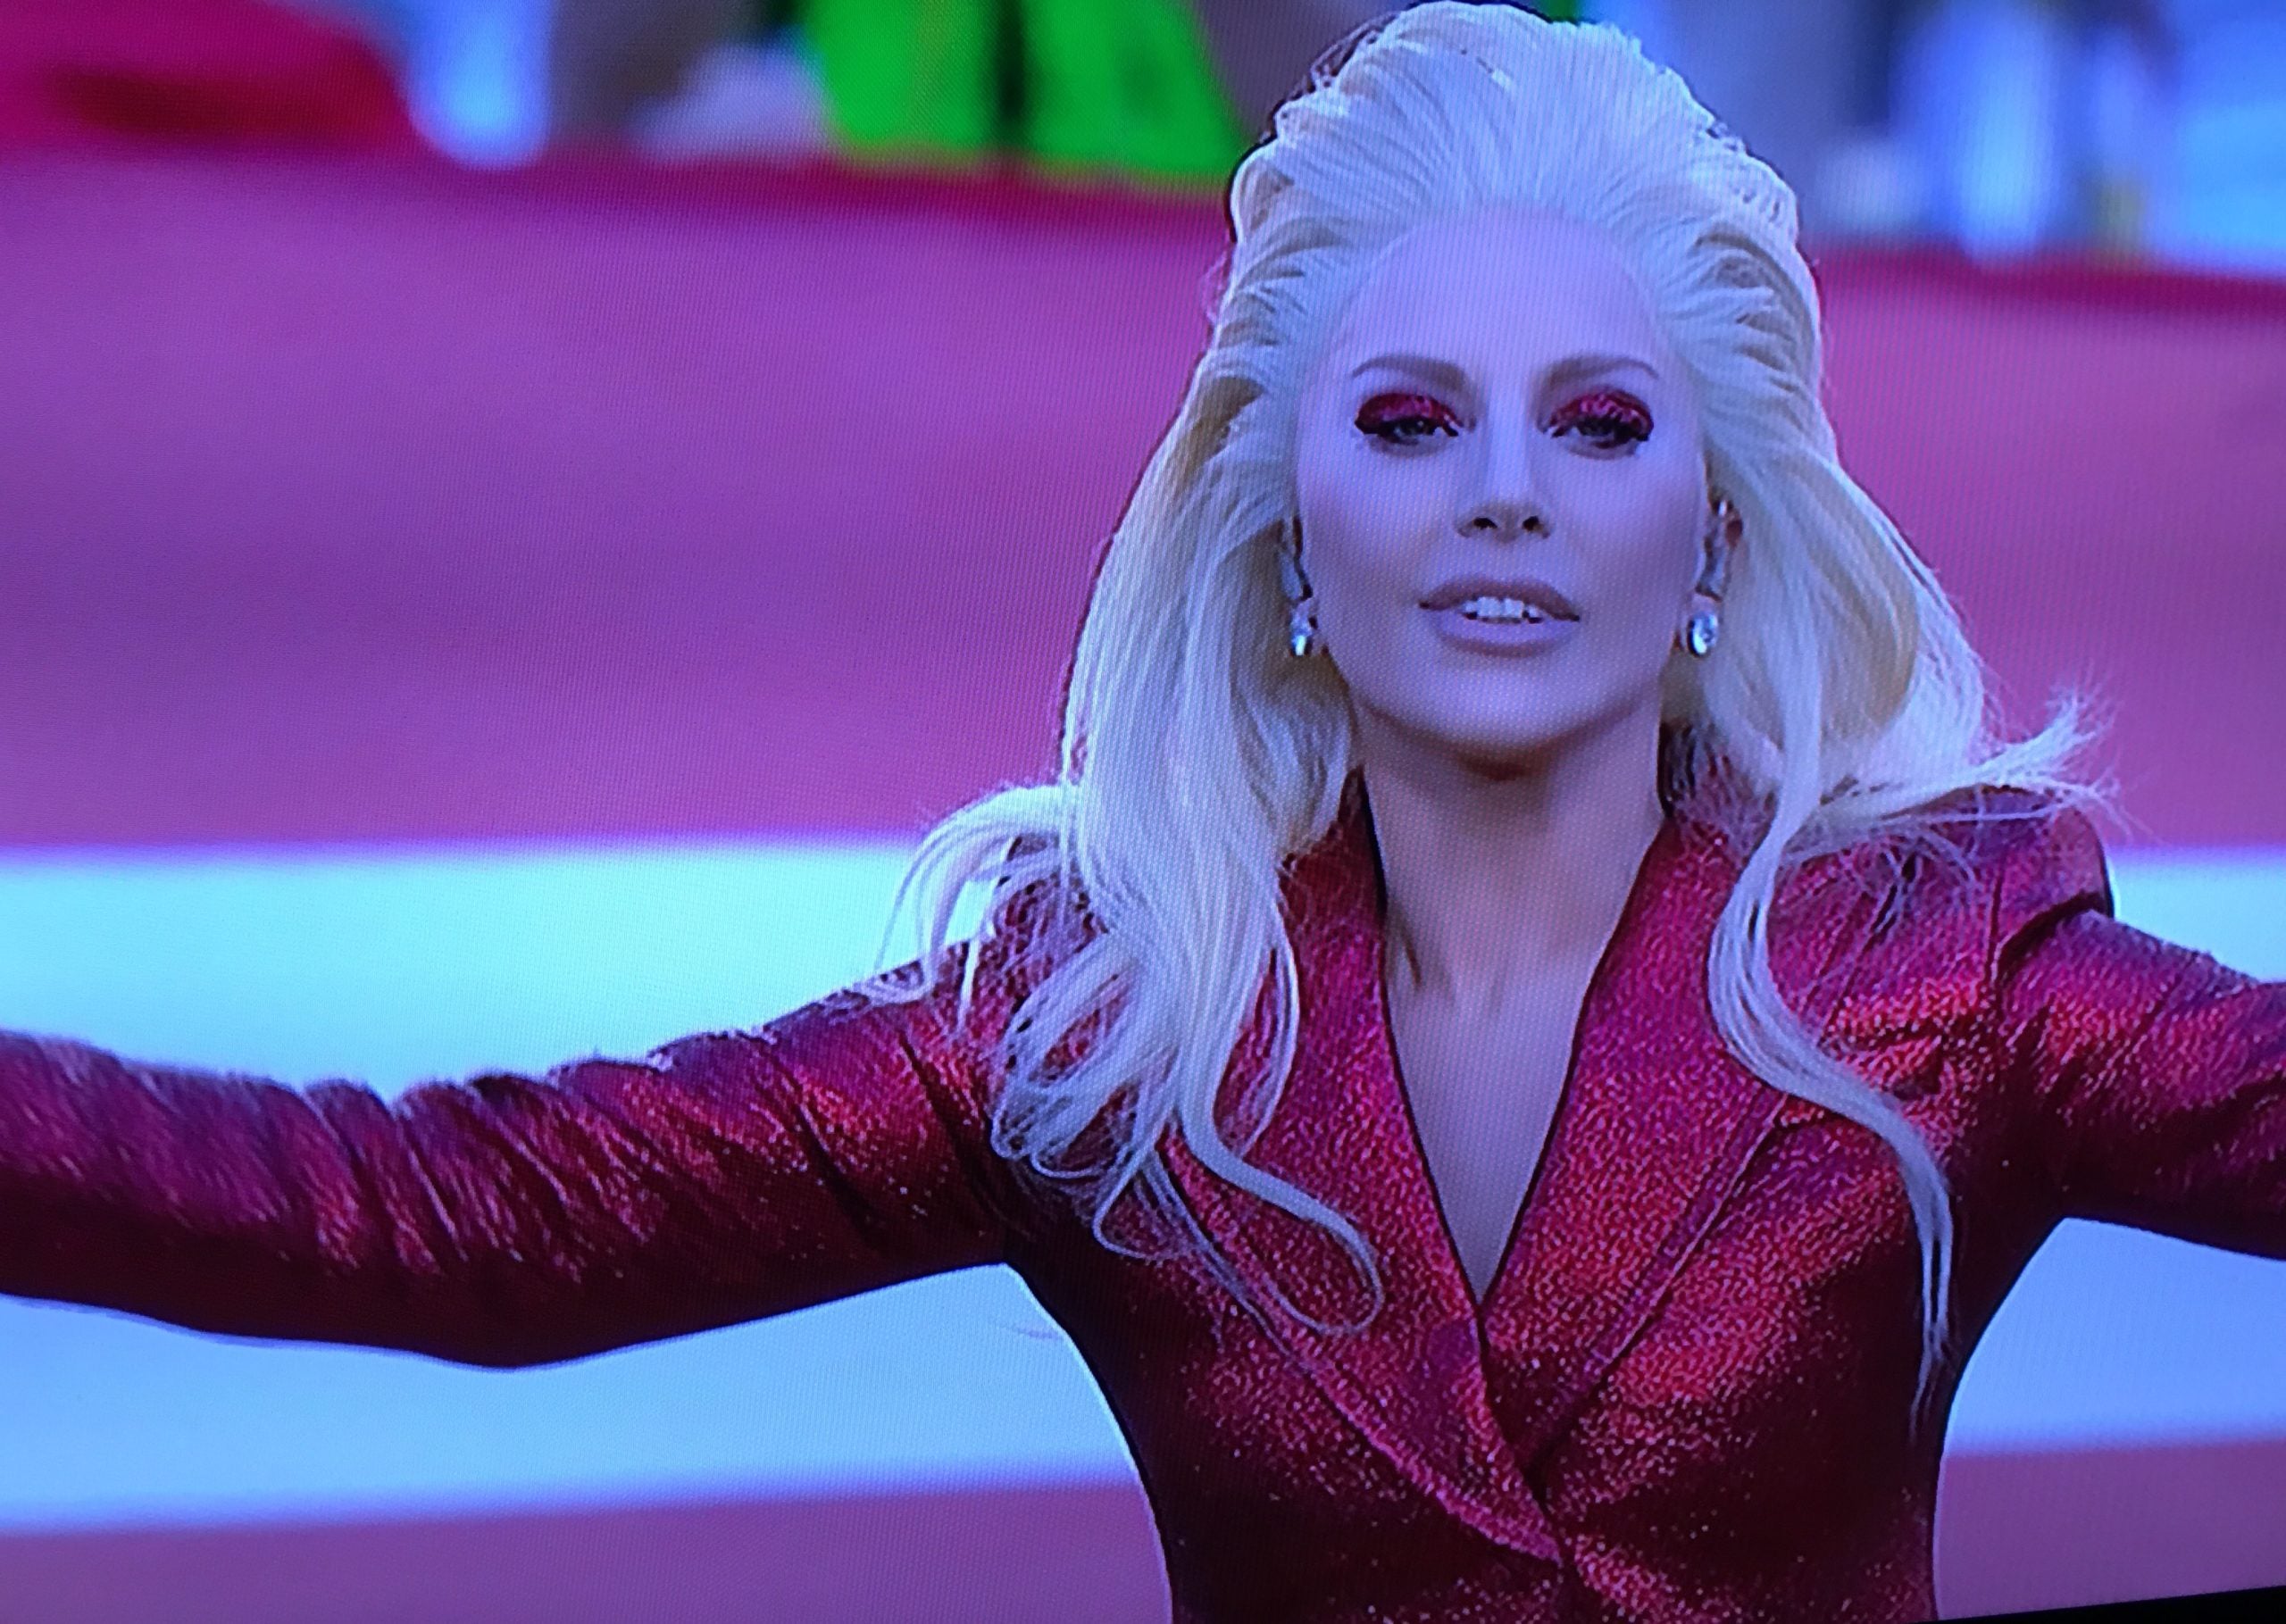 Makeup, Trends, 2017, 2018, Review, Lady, Gaga, Rocks, Glittery, Red, Eyeshadow, Singing, National Anthem Super, Bowl, 2016